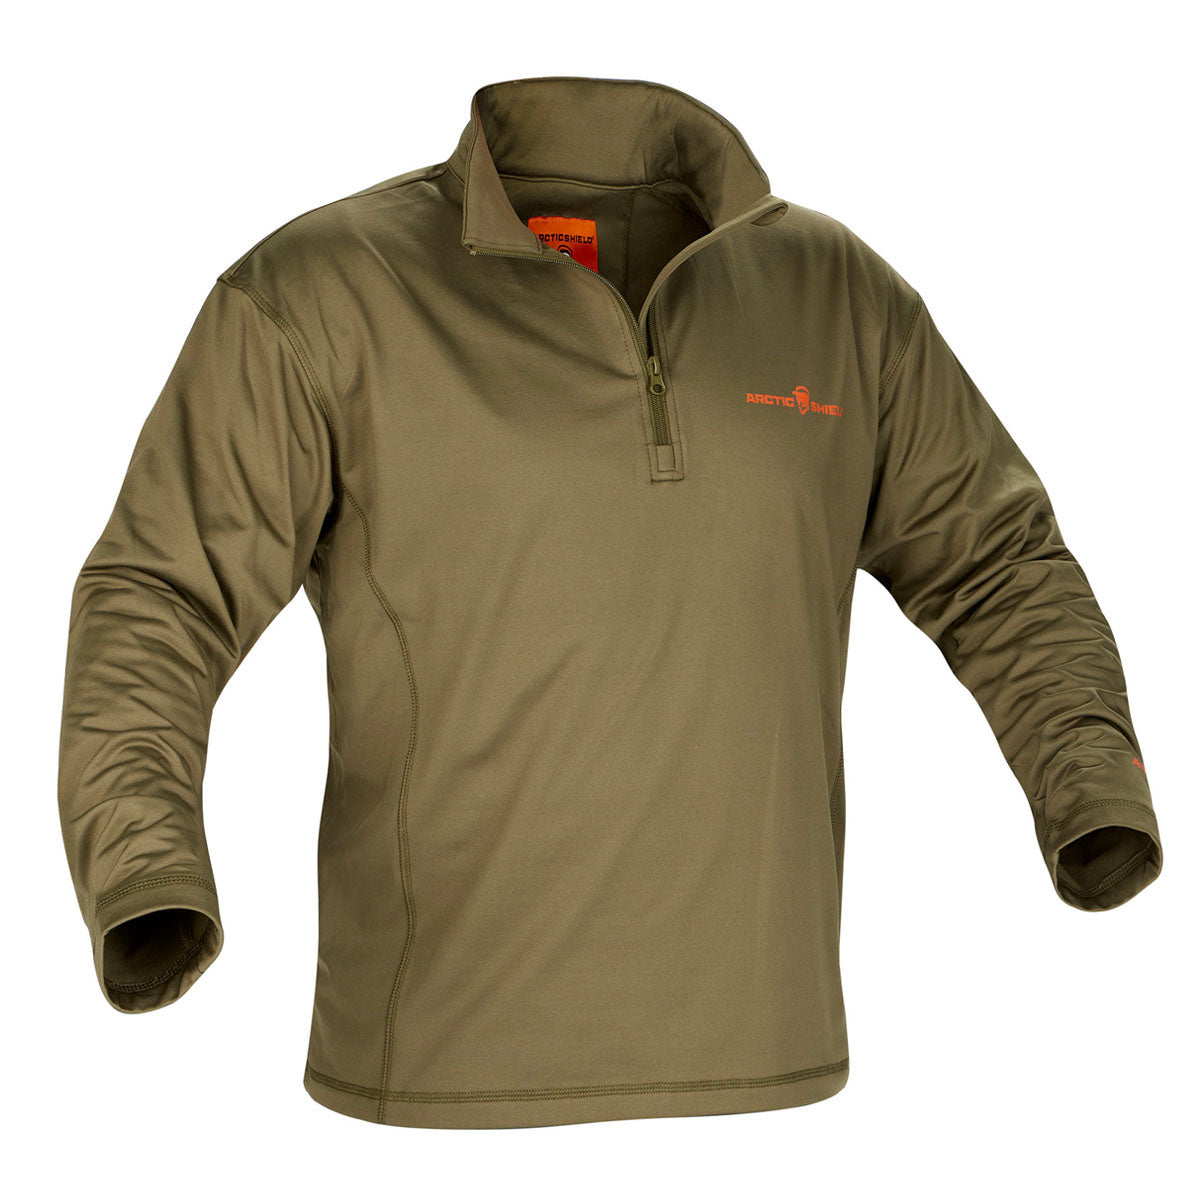 Mens Hunting Apparel | Purchase Insulated Hunting Jackets